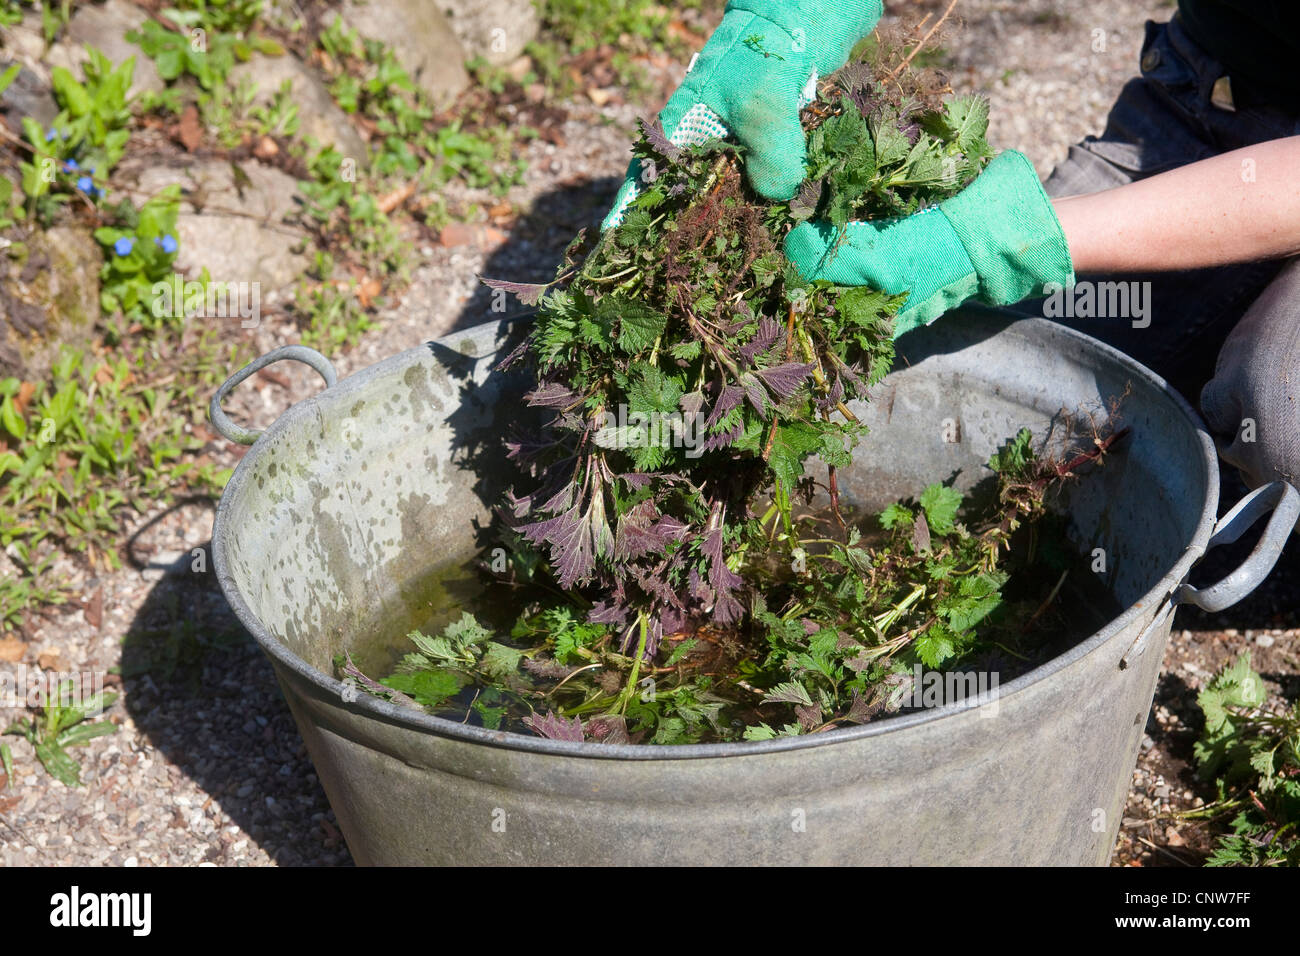 stinging nettle (Urtica dioica), woman producing nettle slurry from fresh nettles for ecological pest control and fertilizer, Germany Stock Photo